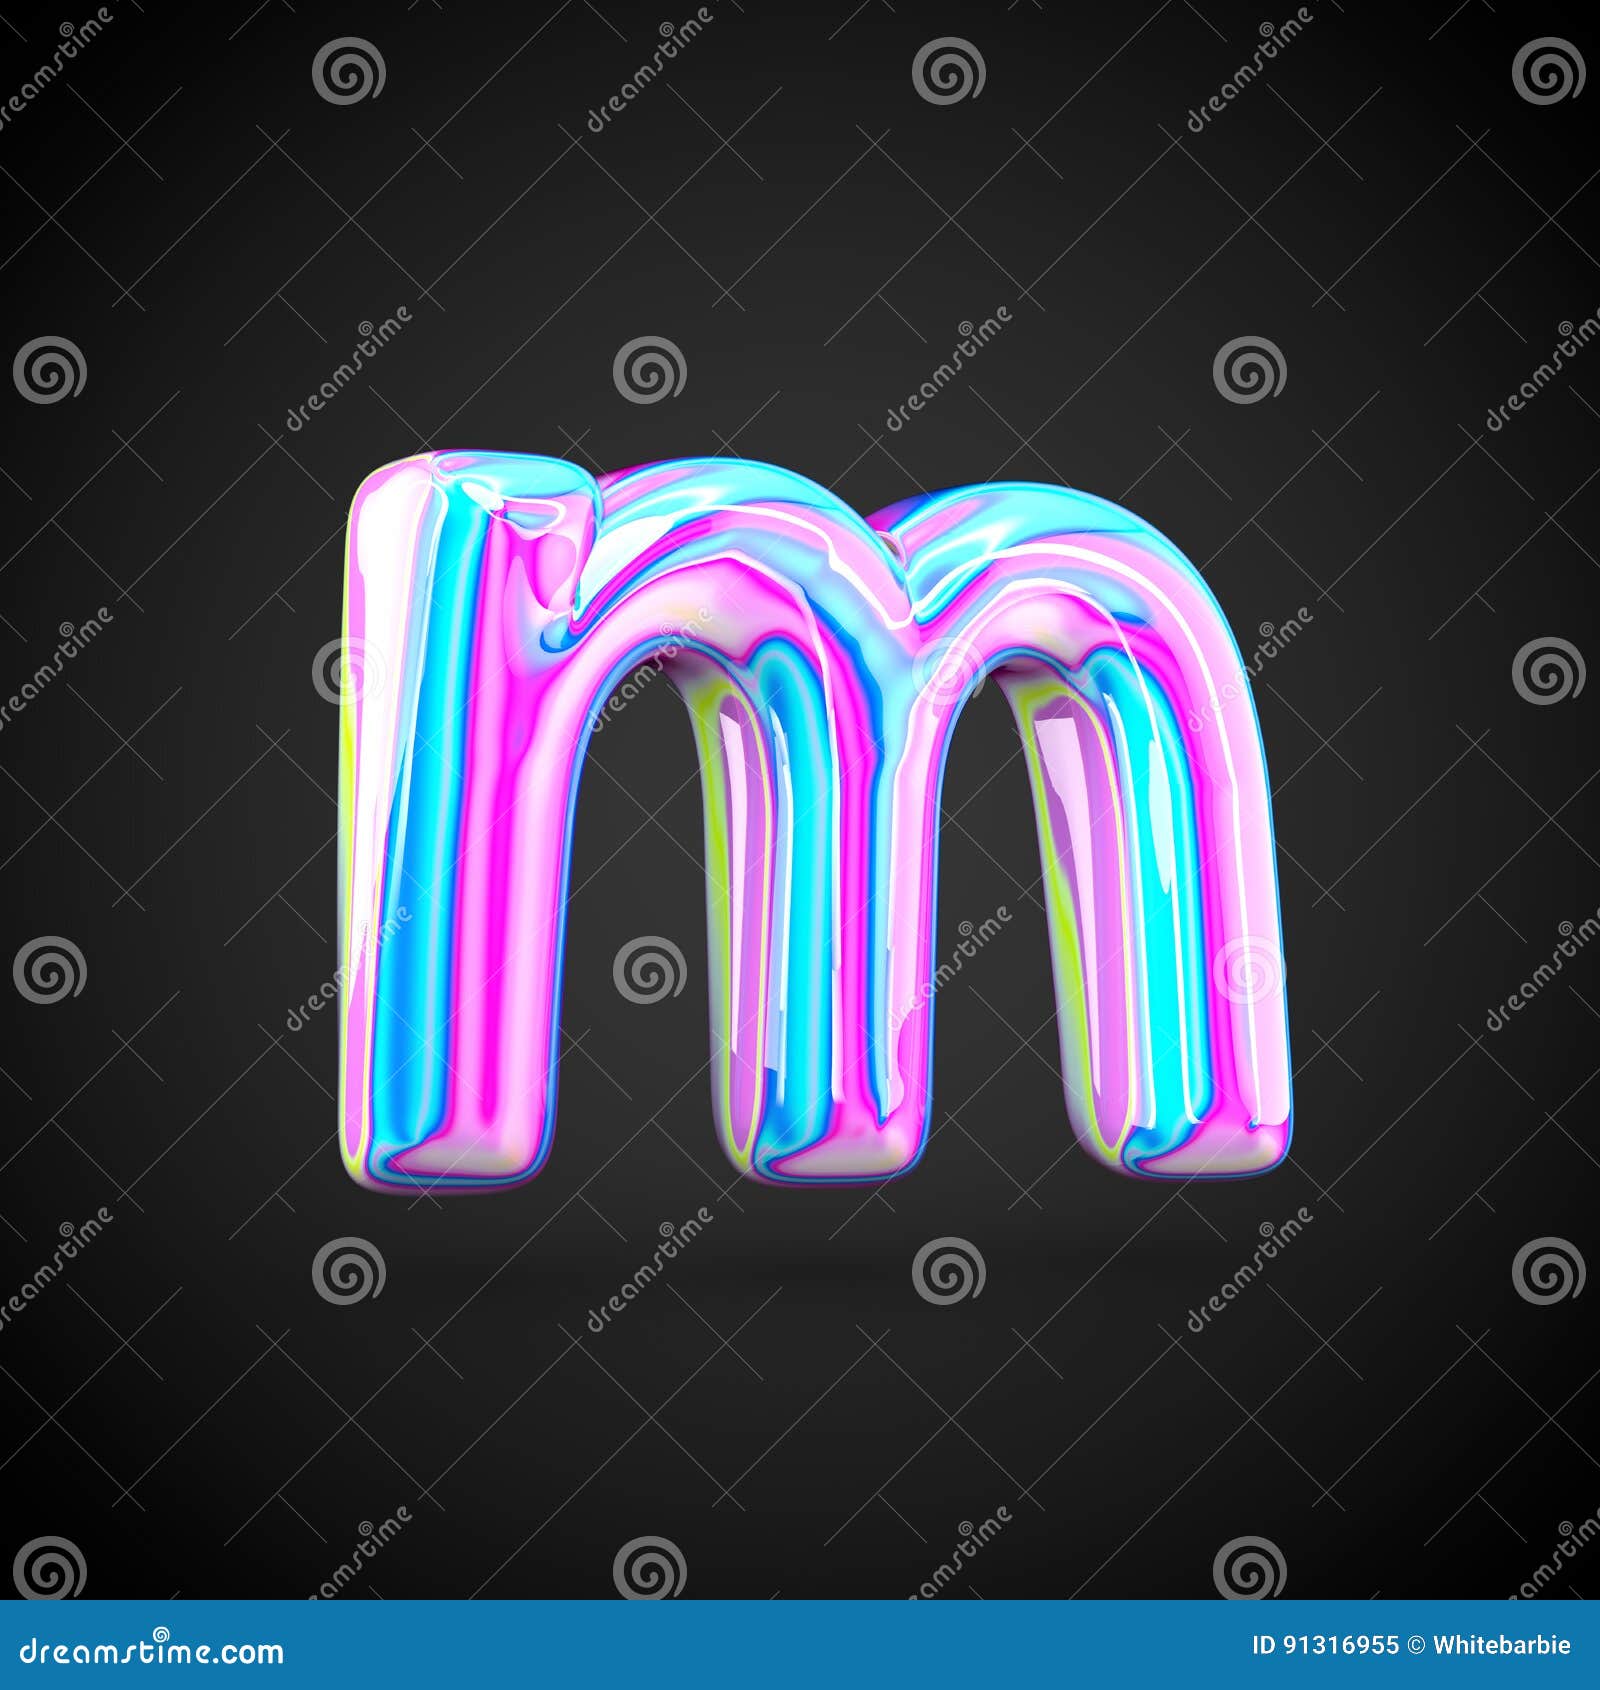 Glossy Holographic Alphabet Letter M Lowercase Isolated on Black ...